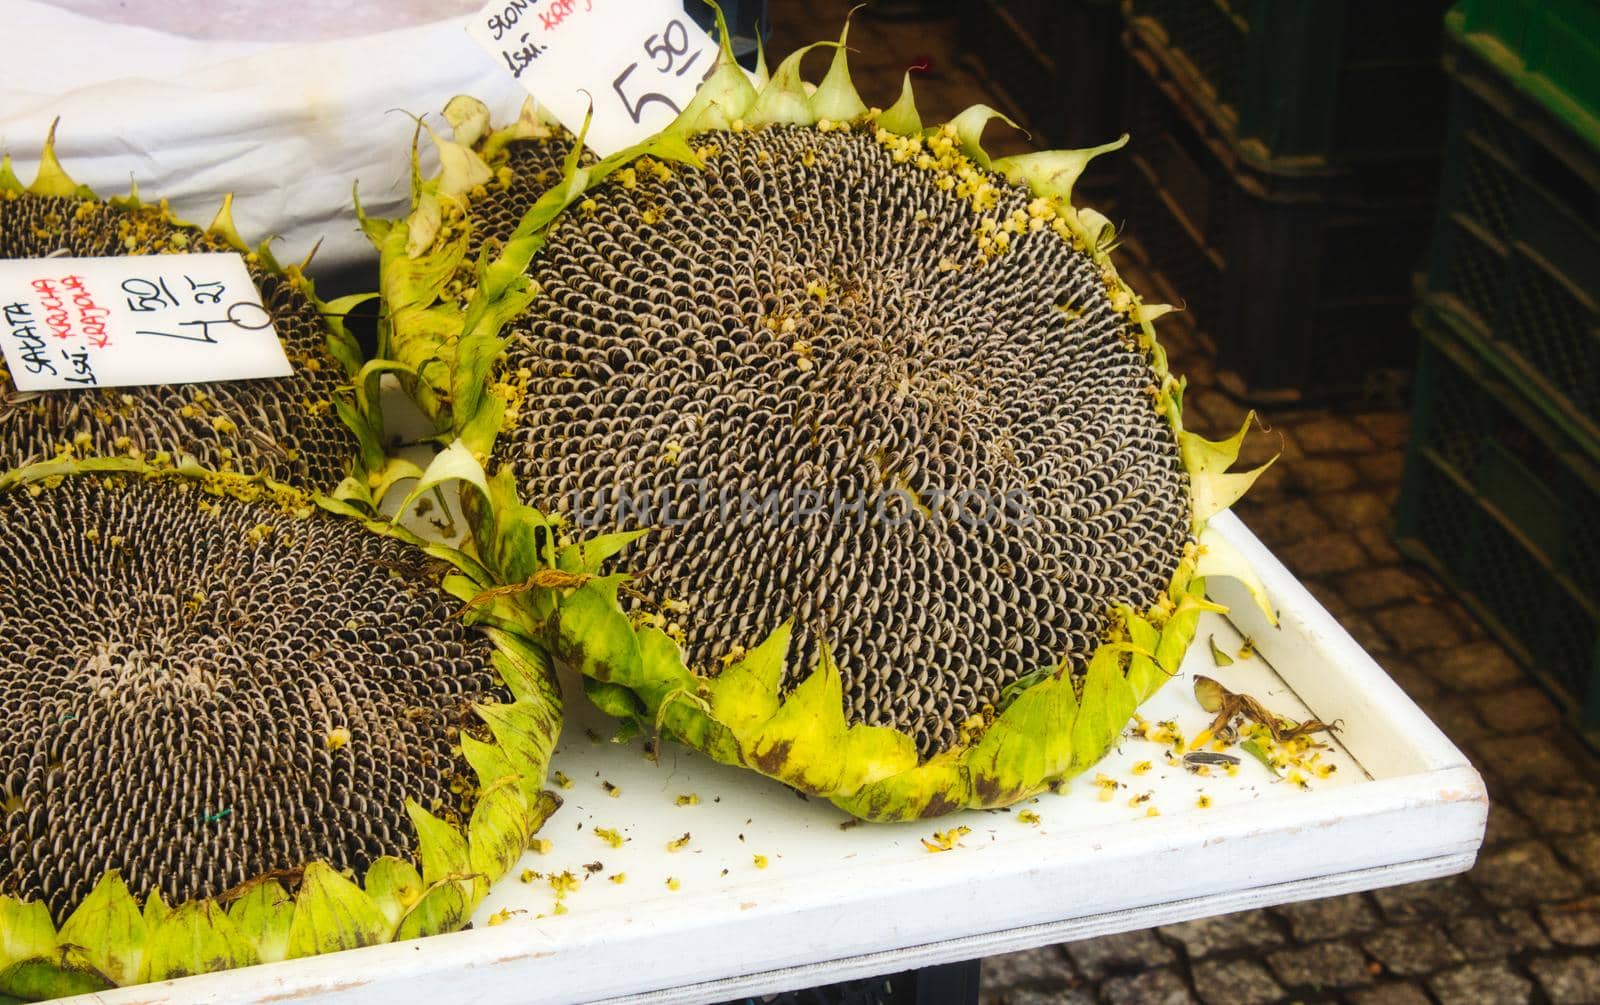 Large sunflower head with seeds being sold at a food market by tennesseewitney